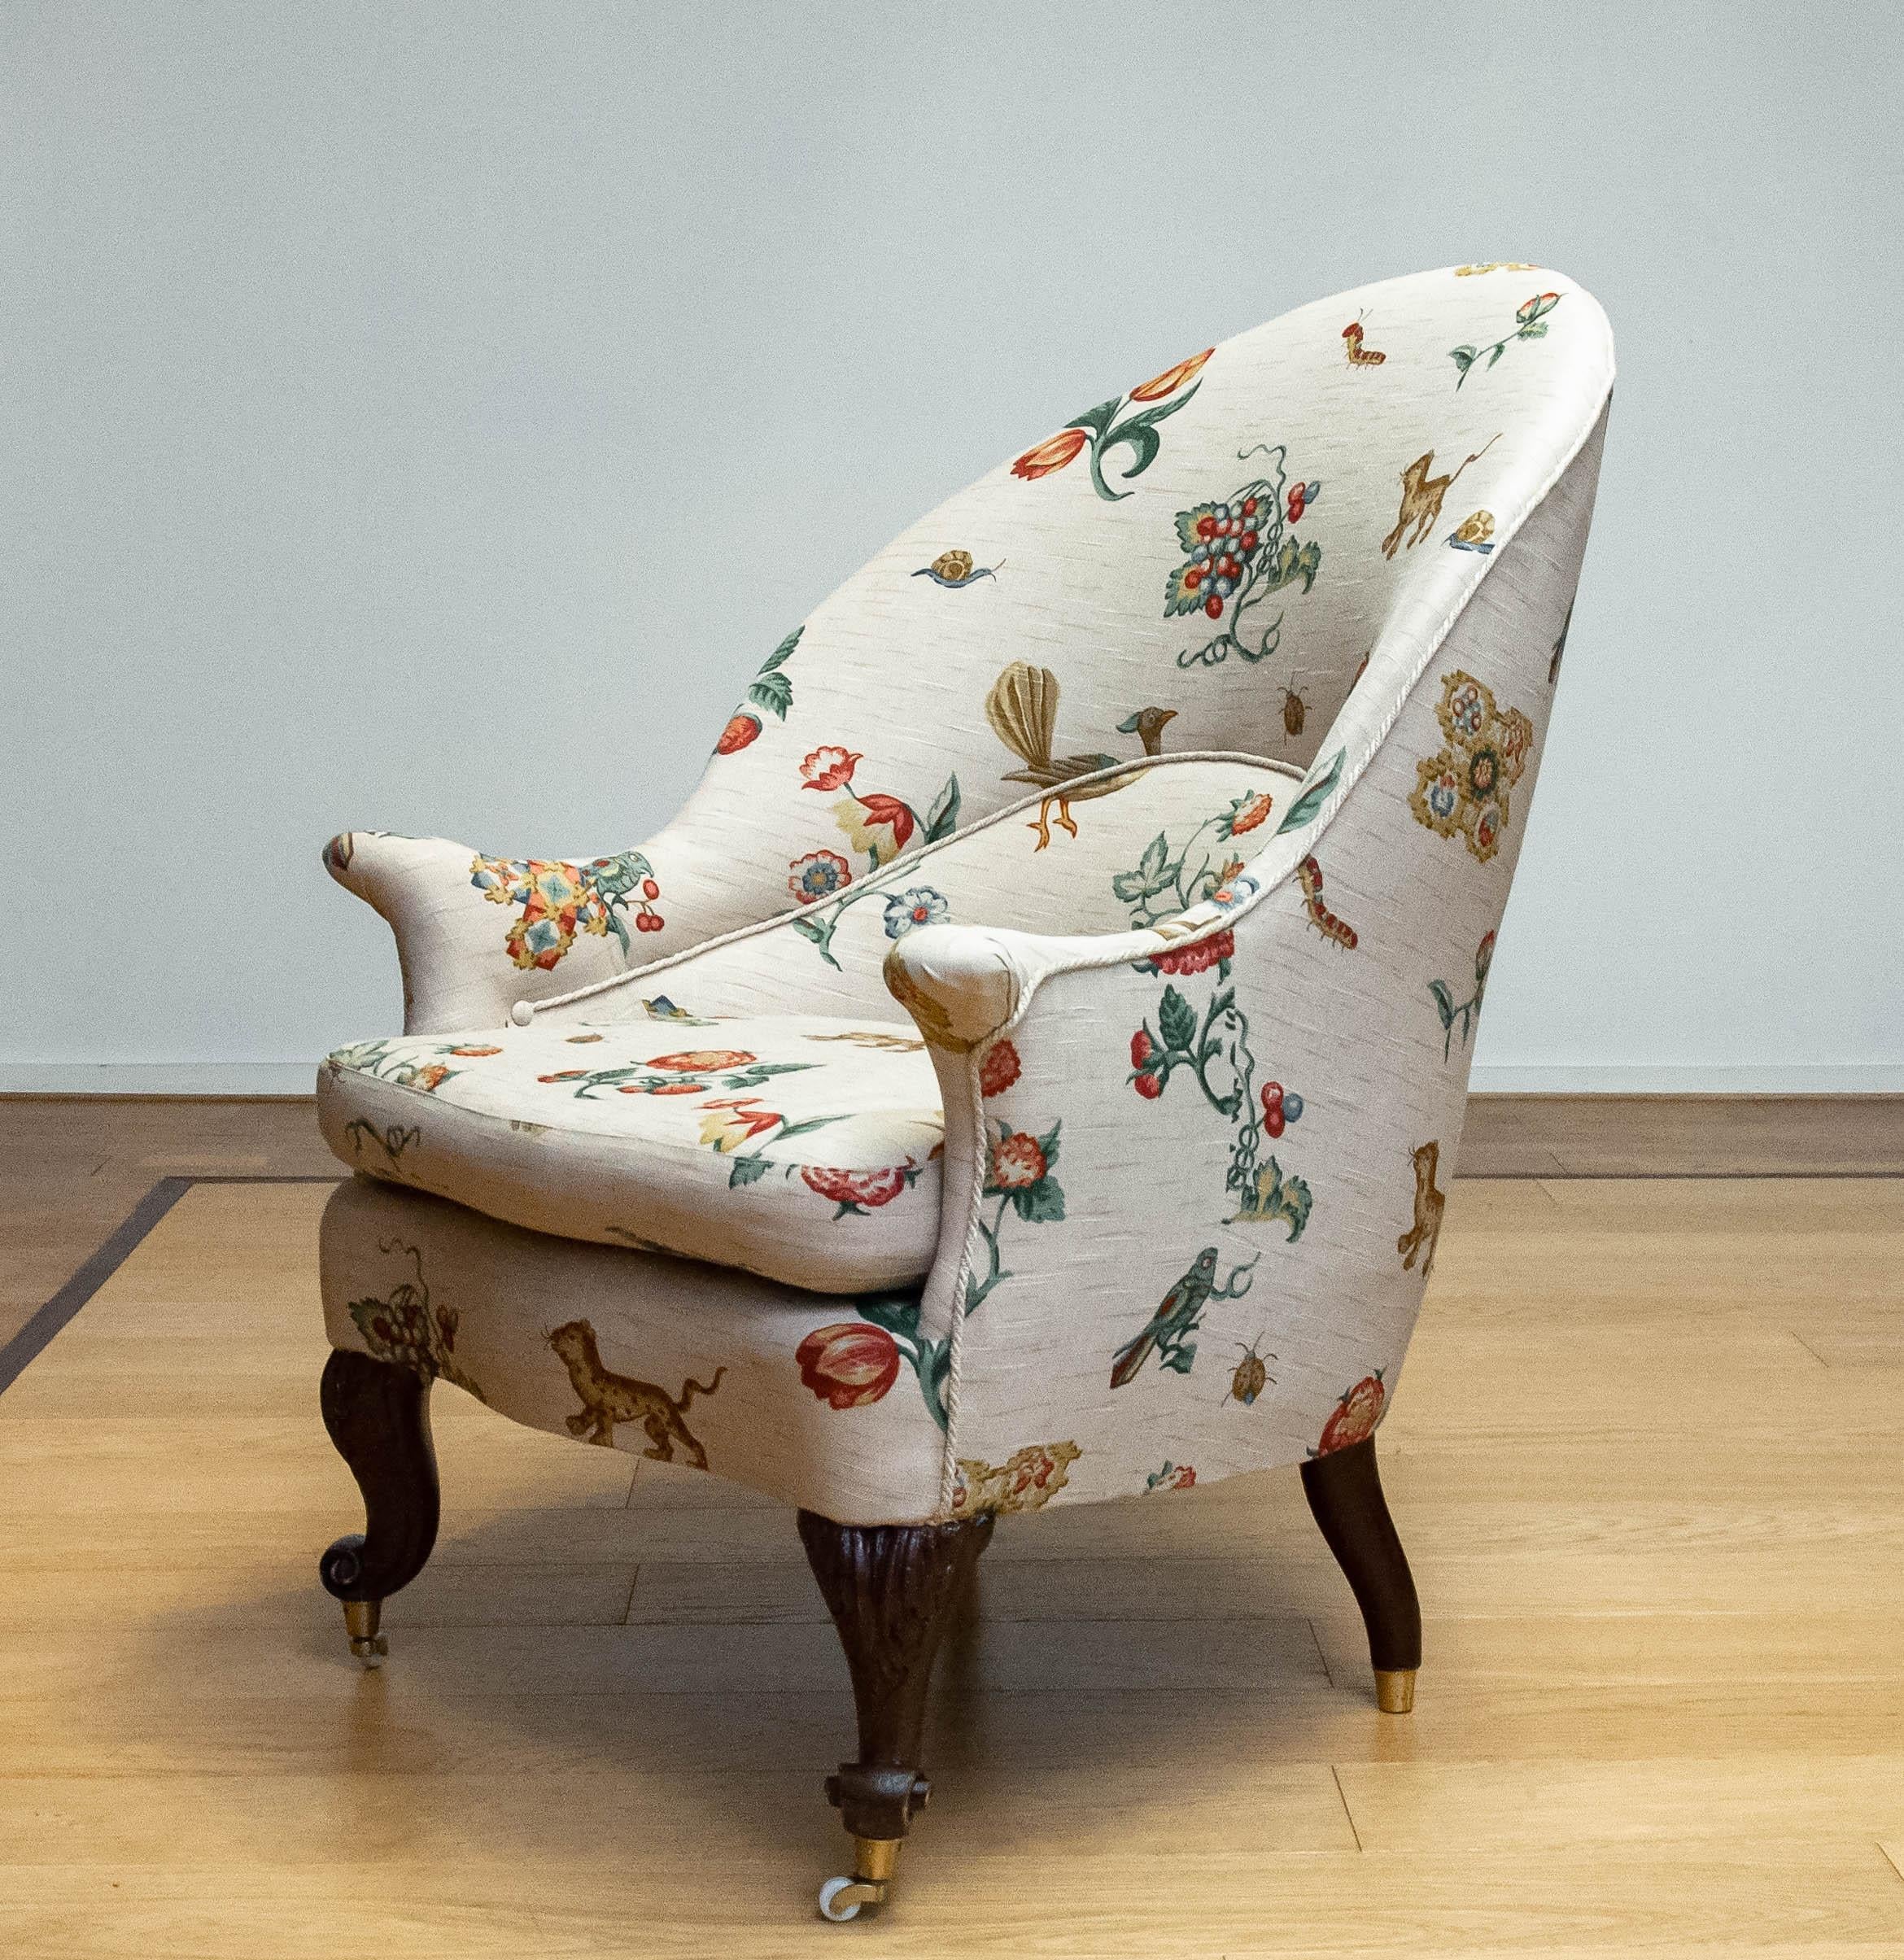 19th Century Swedish Armchair With Linen Flora And Fauna Fantasy Print Fabric For Sale 5